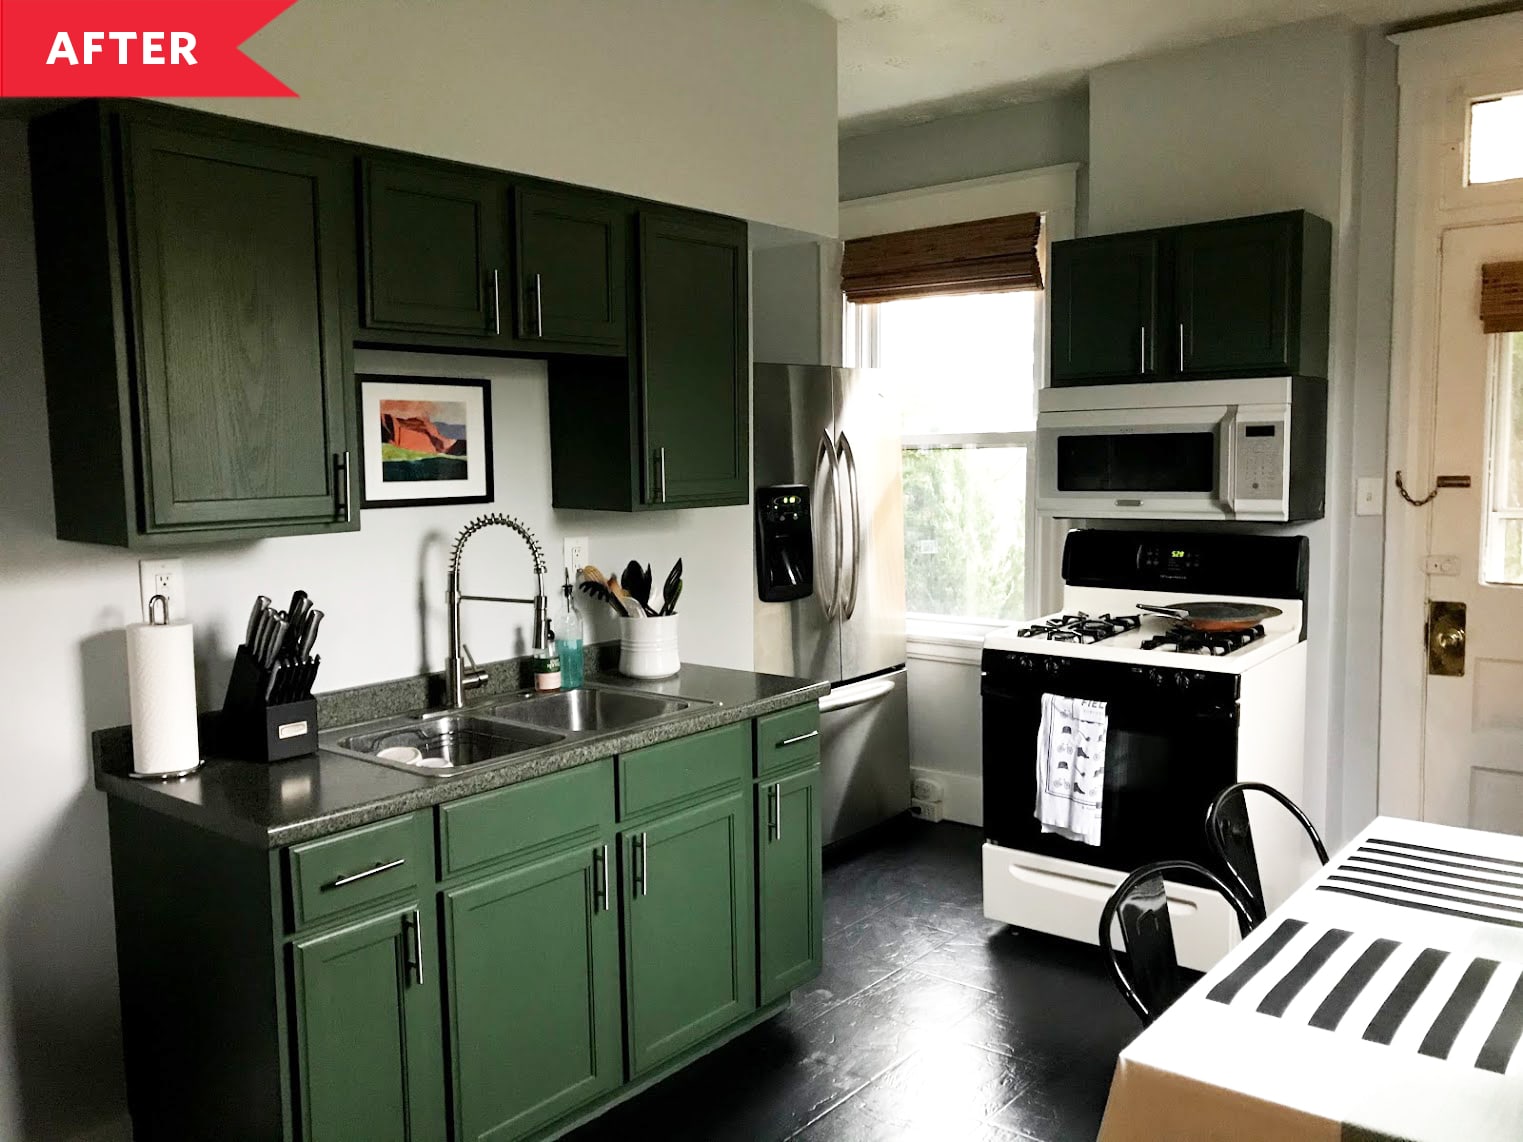 After: Kitchen with cabinets painted emerald green